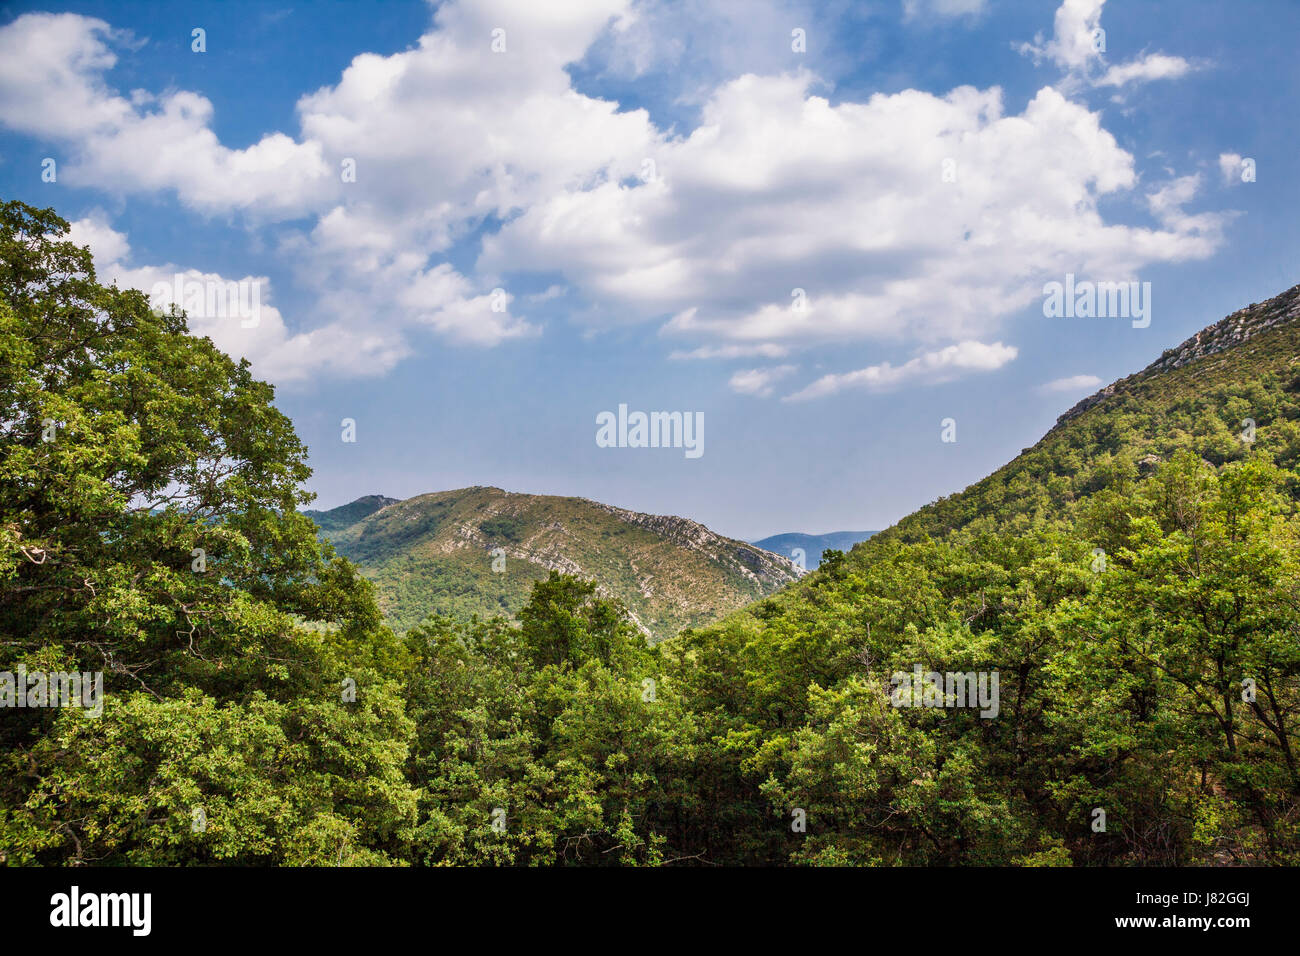 France, Languedoc-Roussillon-Midi-Pyrenees region, department Gard, view from Col du Lac in the Cevennes near Sumene Stock Photo